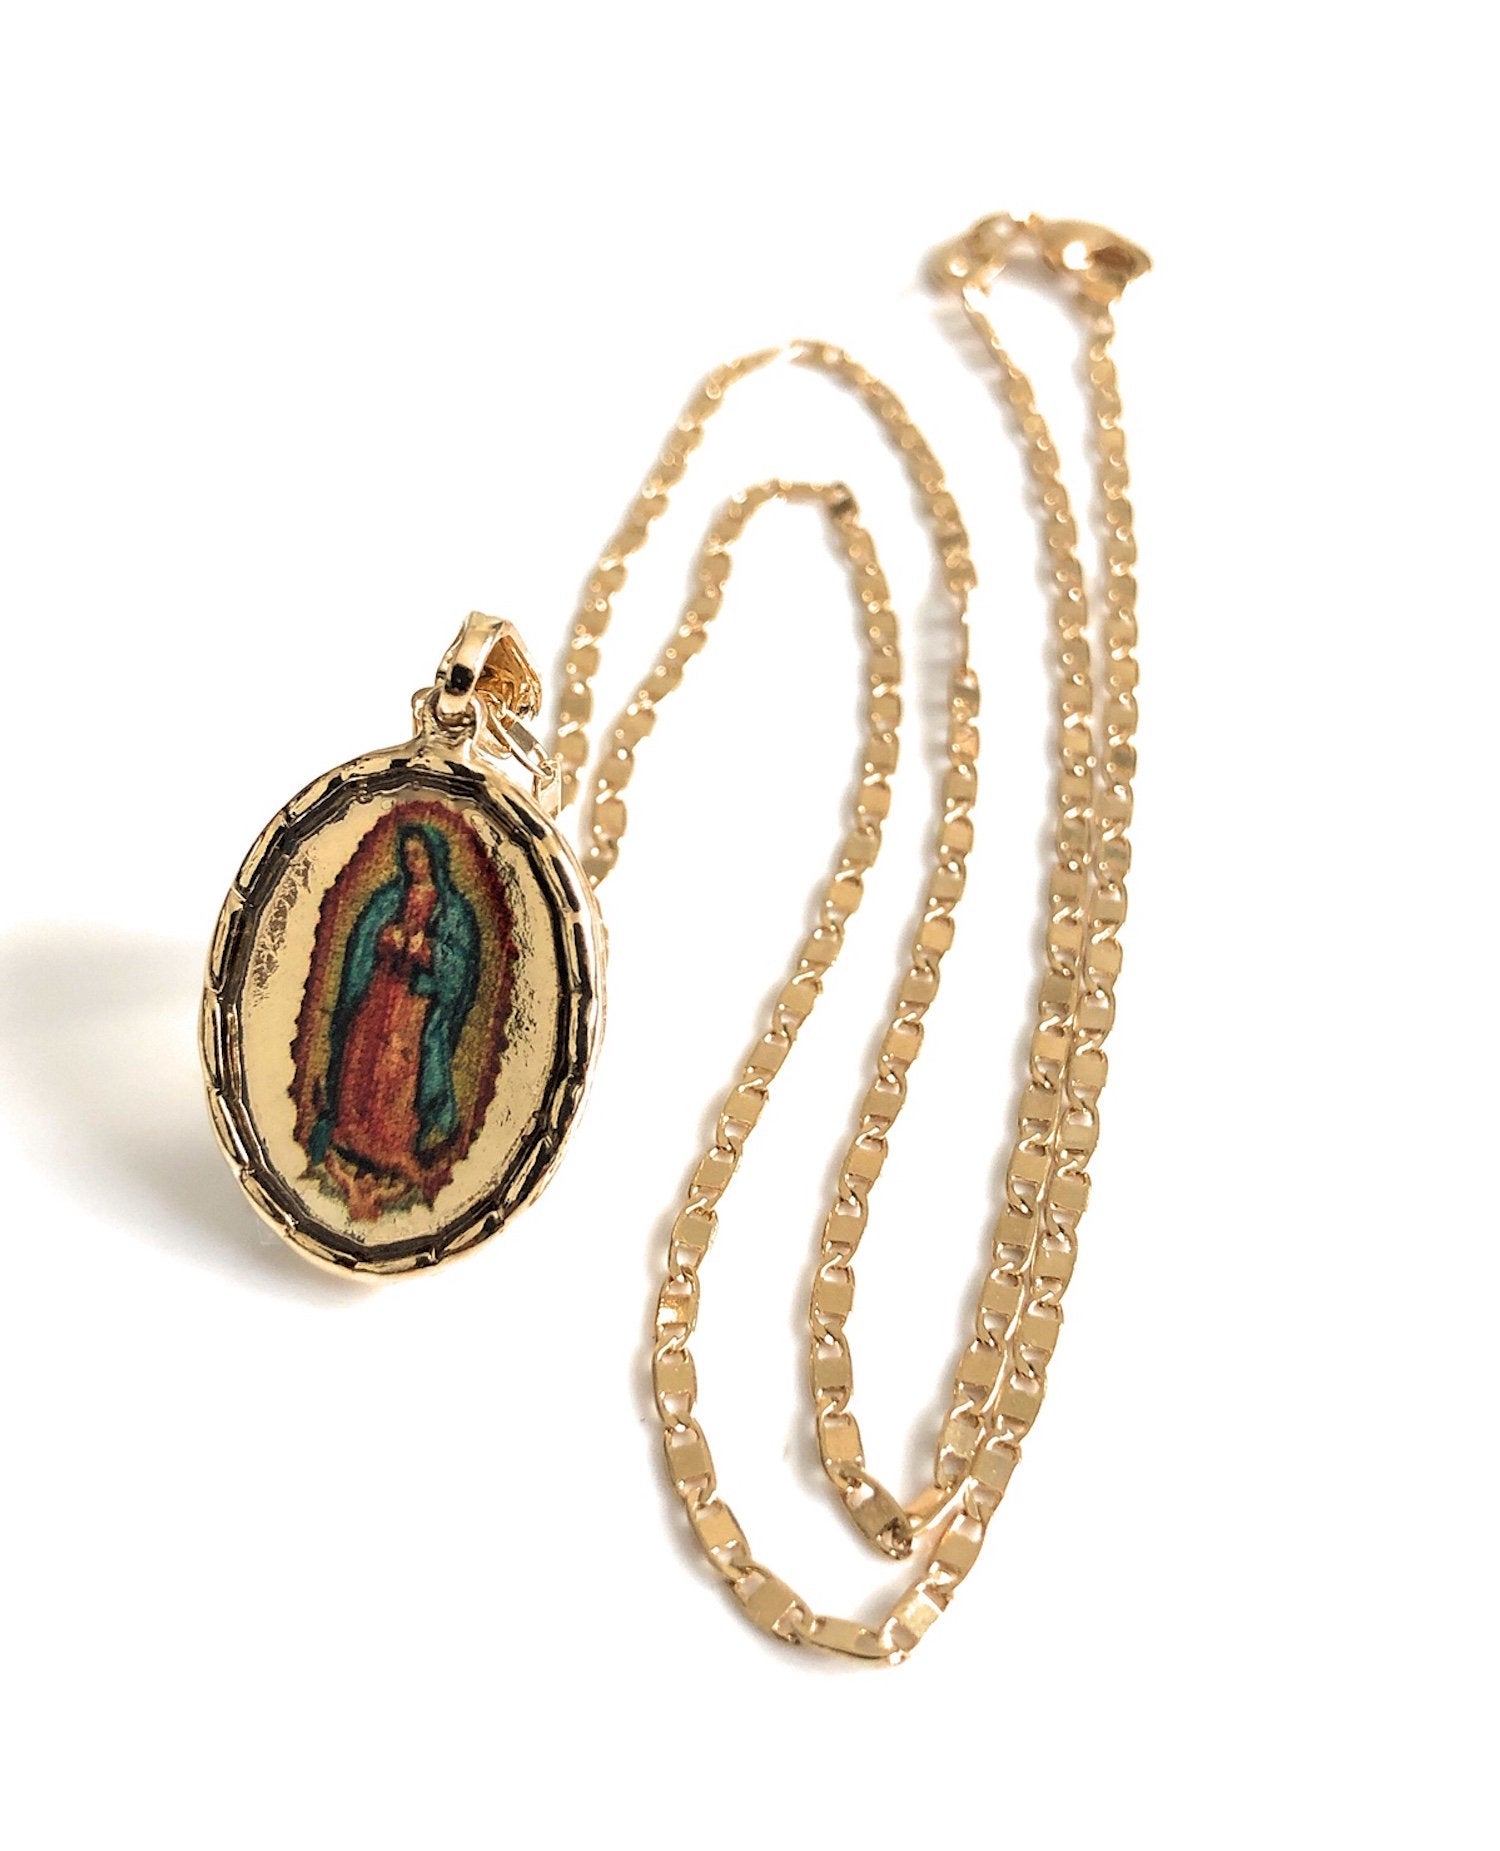 Our Lady of Guadalupe Medallion Pendant in 14K Two-Tone Gold | Zales Outlet